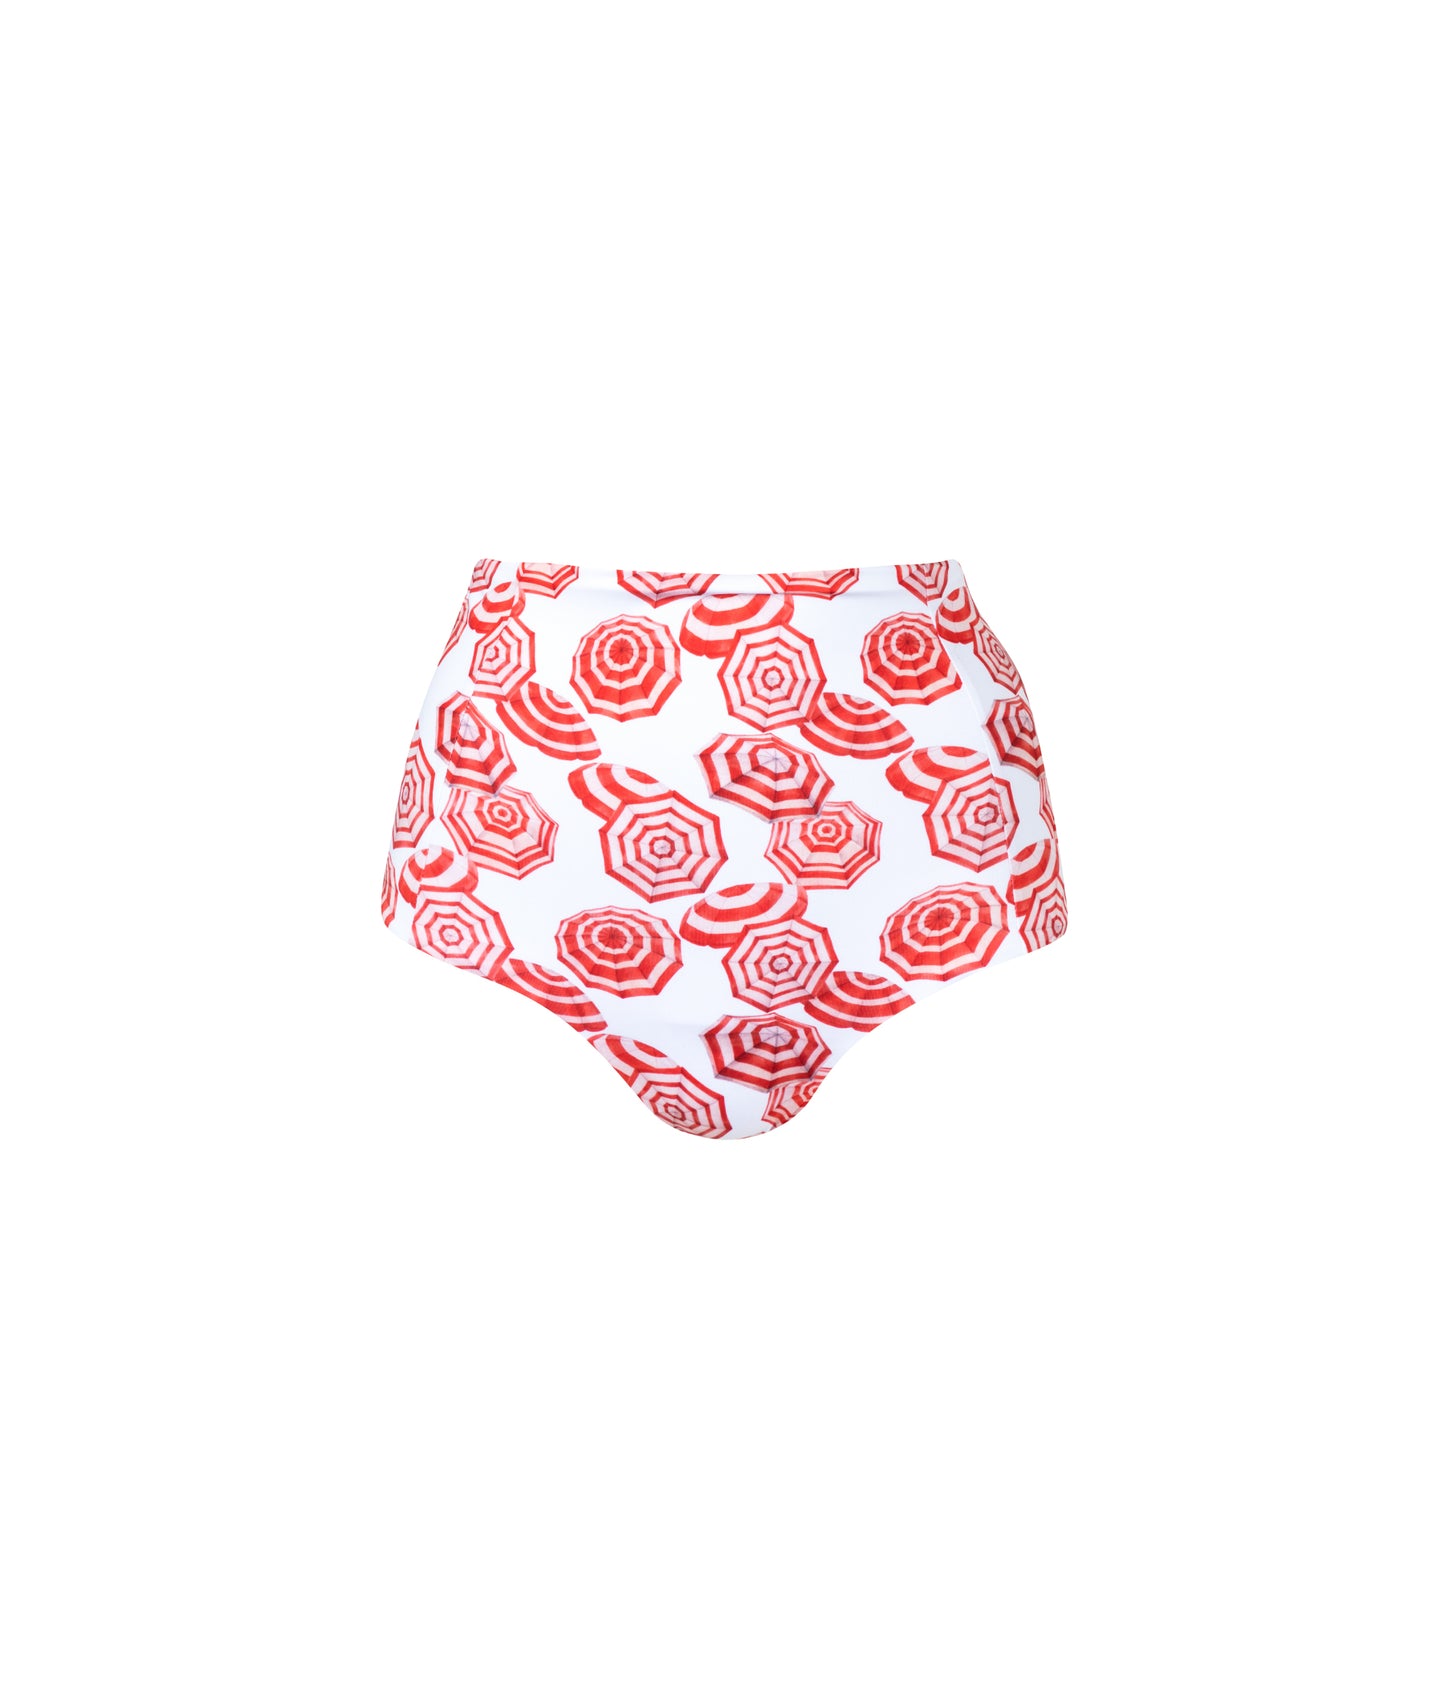 Load image into Gallery viewer, Verdelimon - Bikini Bottom - Tunas - Printed - Vogue - Front
